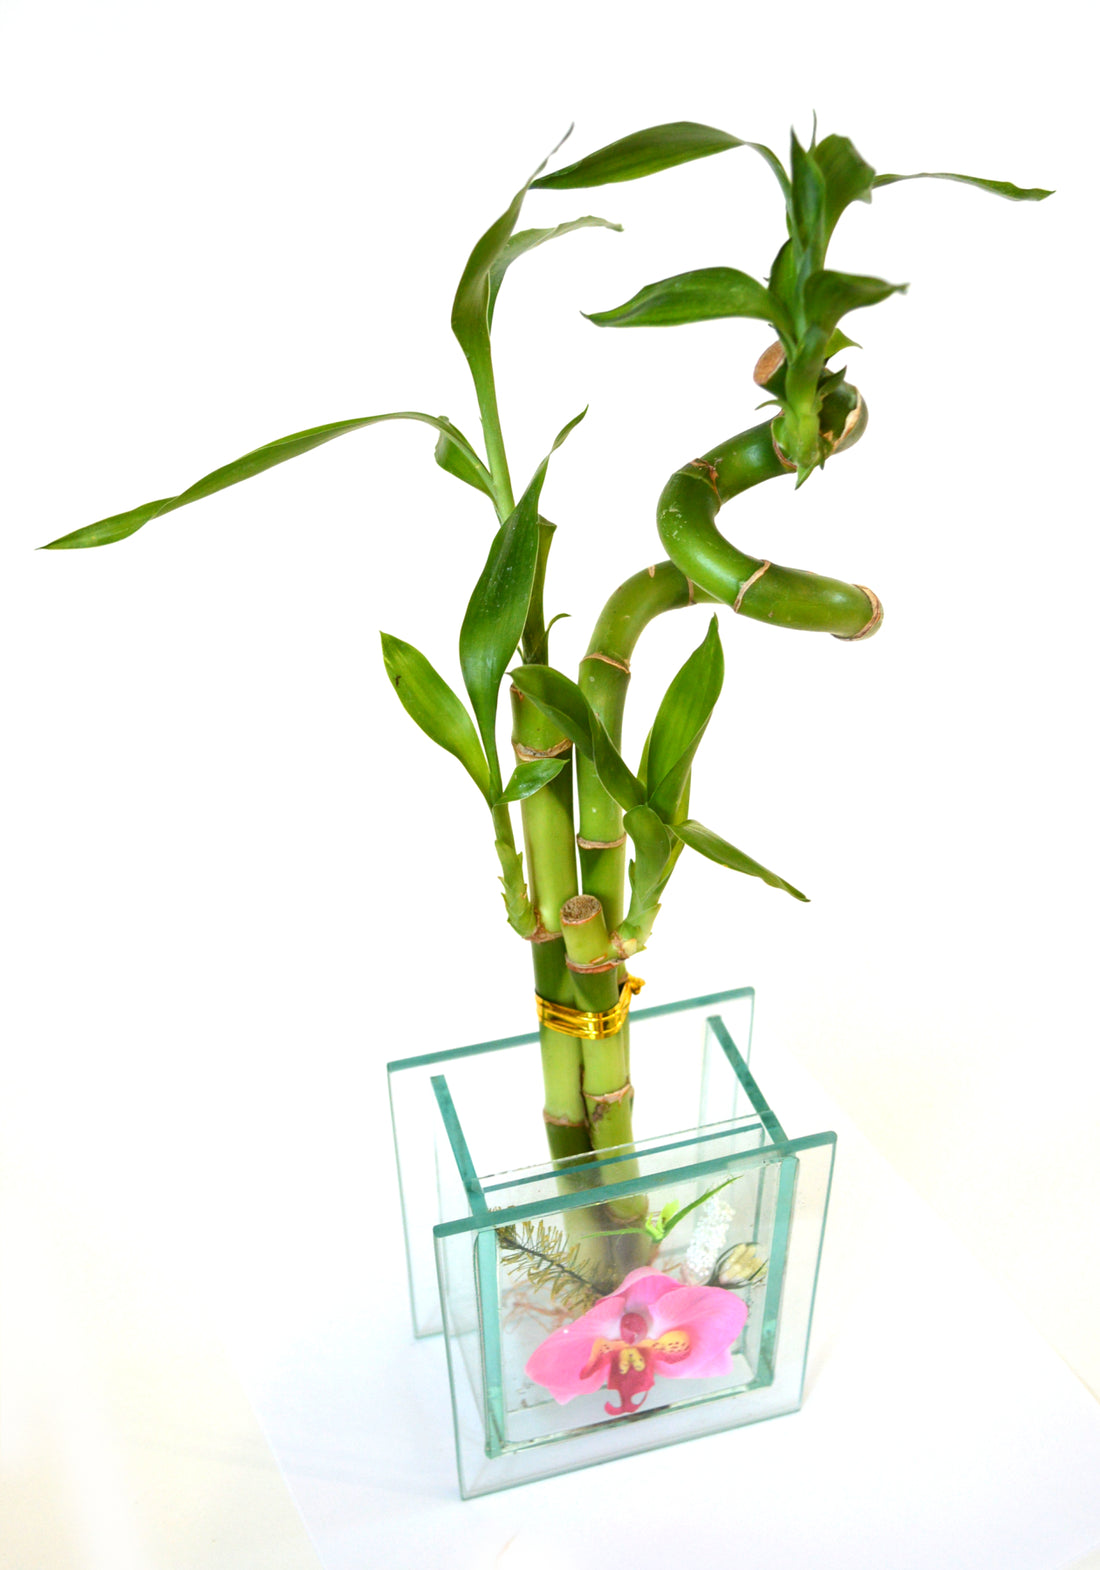 9GreenBox - Live 3 Style Lucky Bamboo Plant Arrangement with Glass Orchid Vase - 9GreenBox